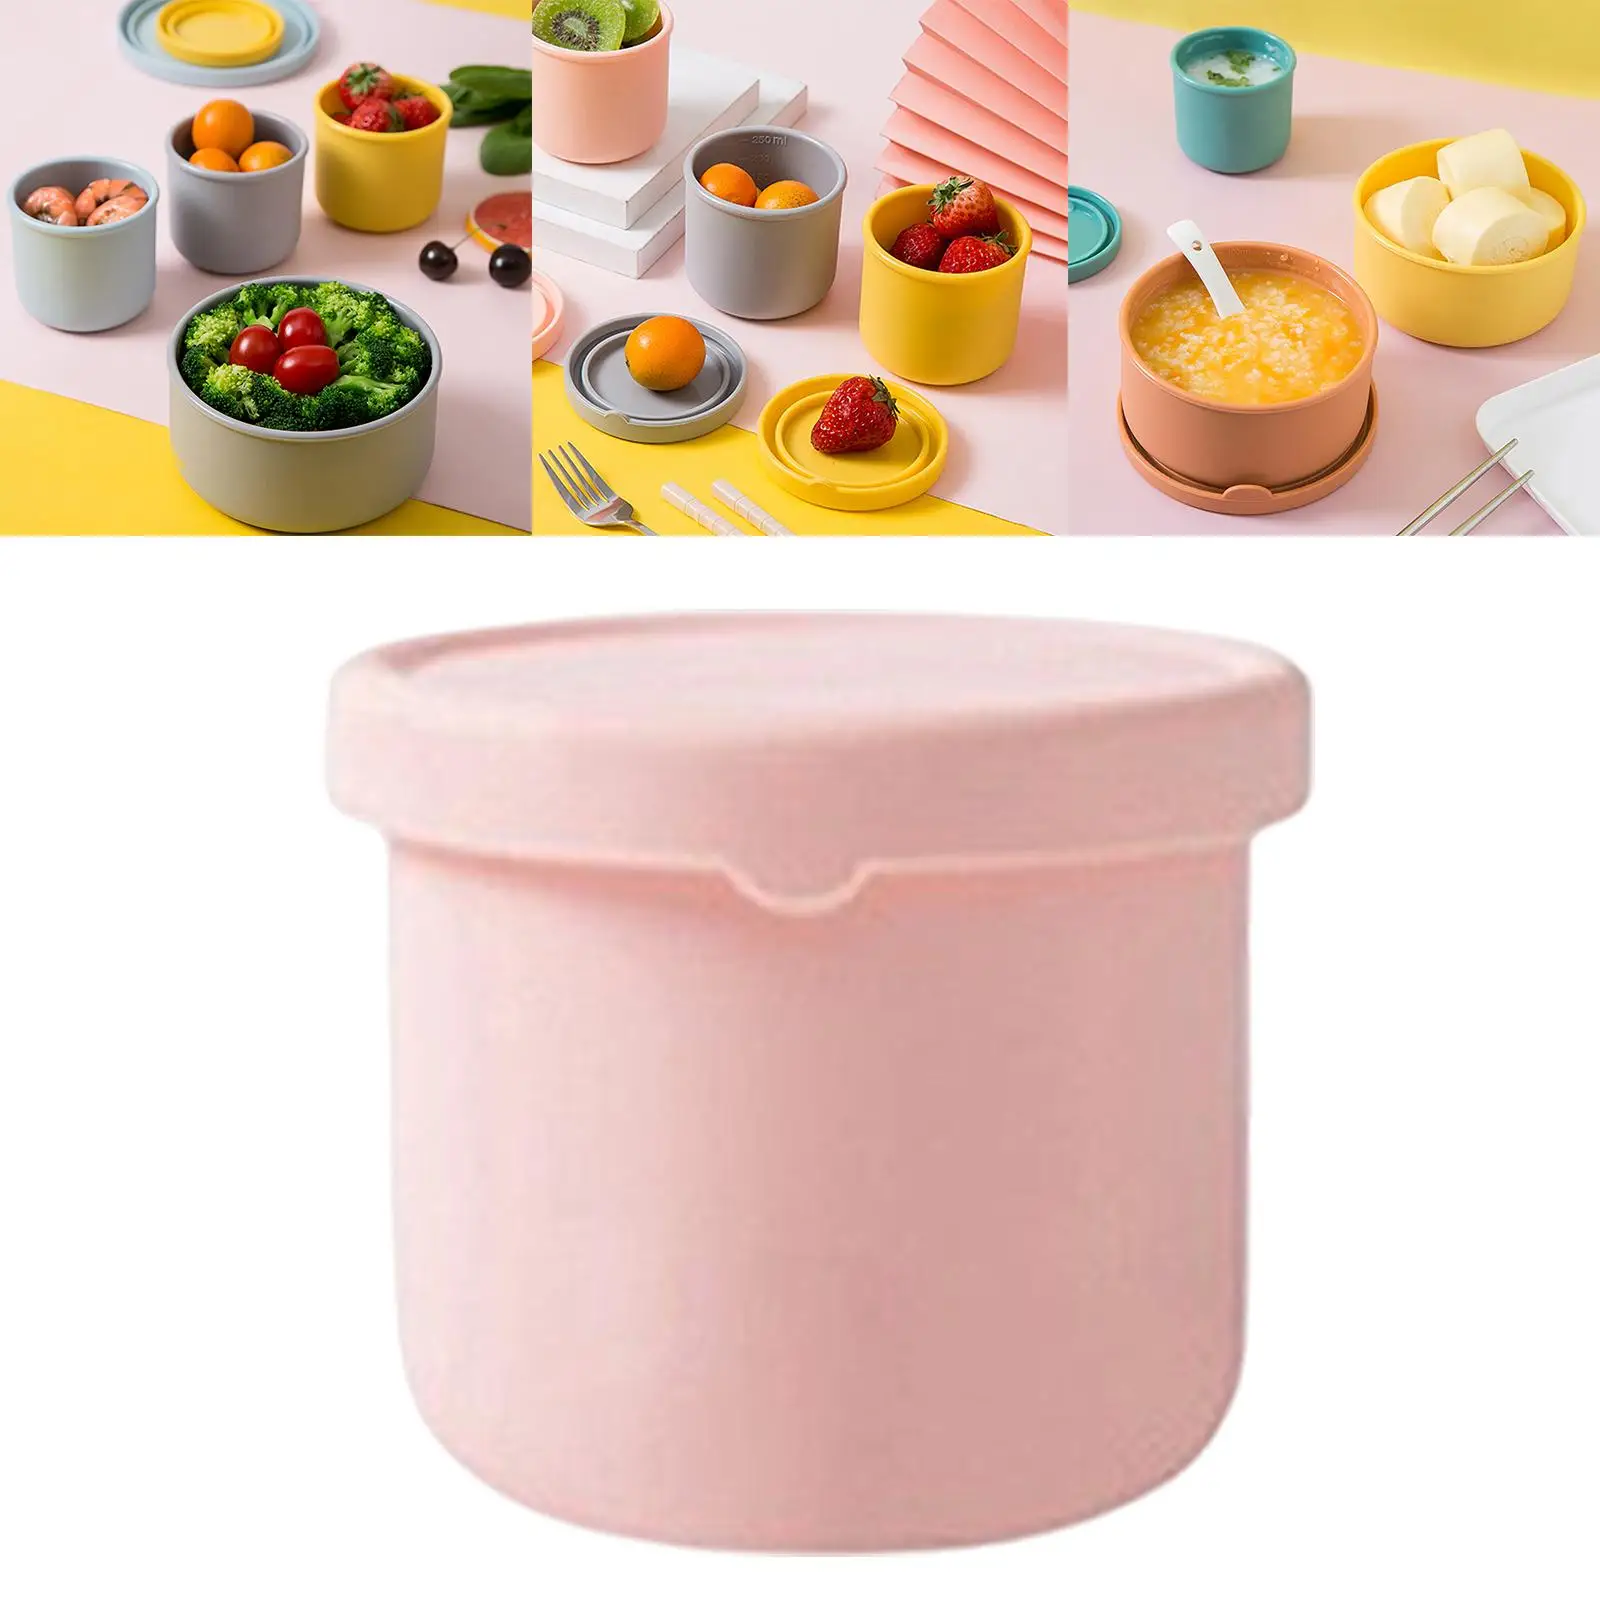 Silicone Box for Lunch, Food Storage Container with Lid, Kitchen Microwave Freezer and Dishwasher Storage